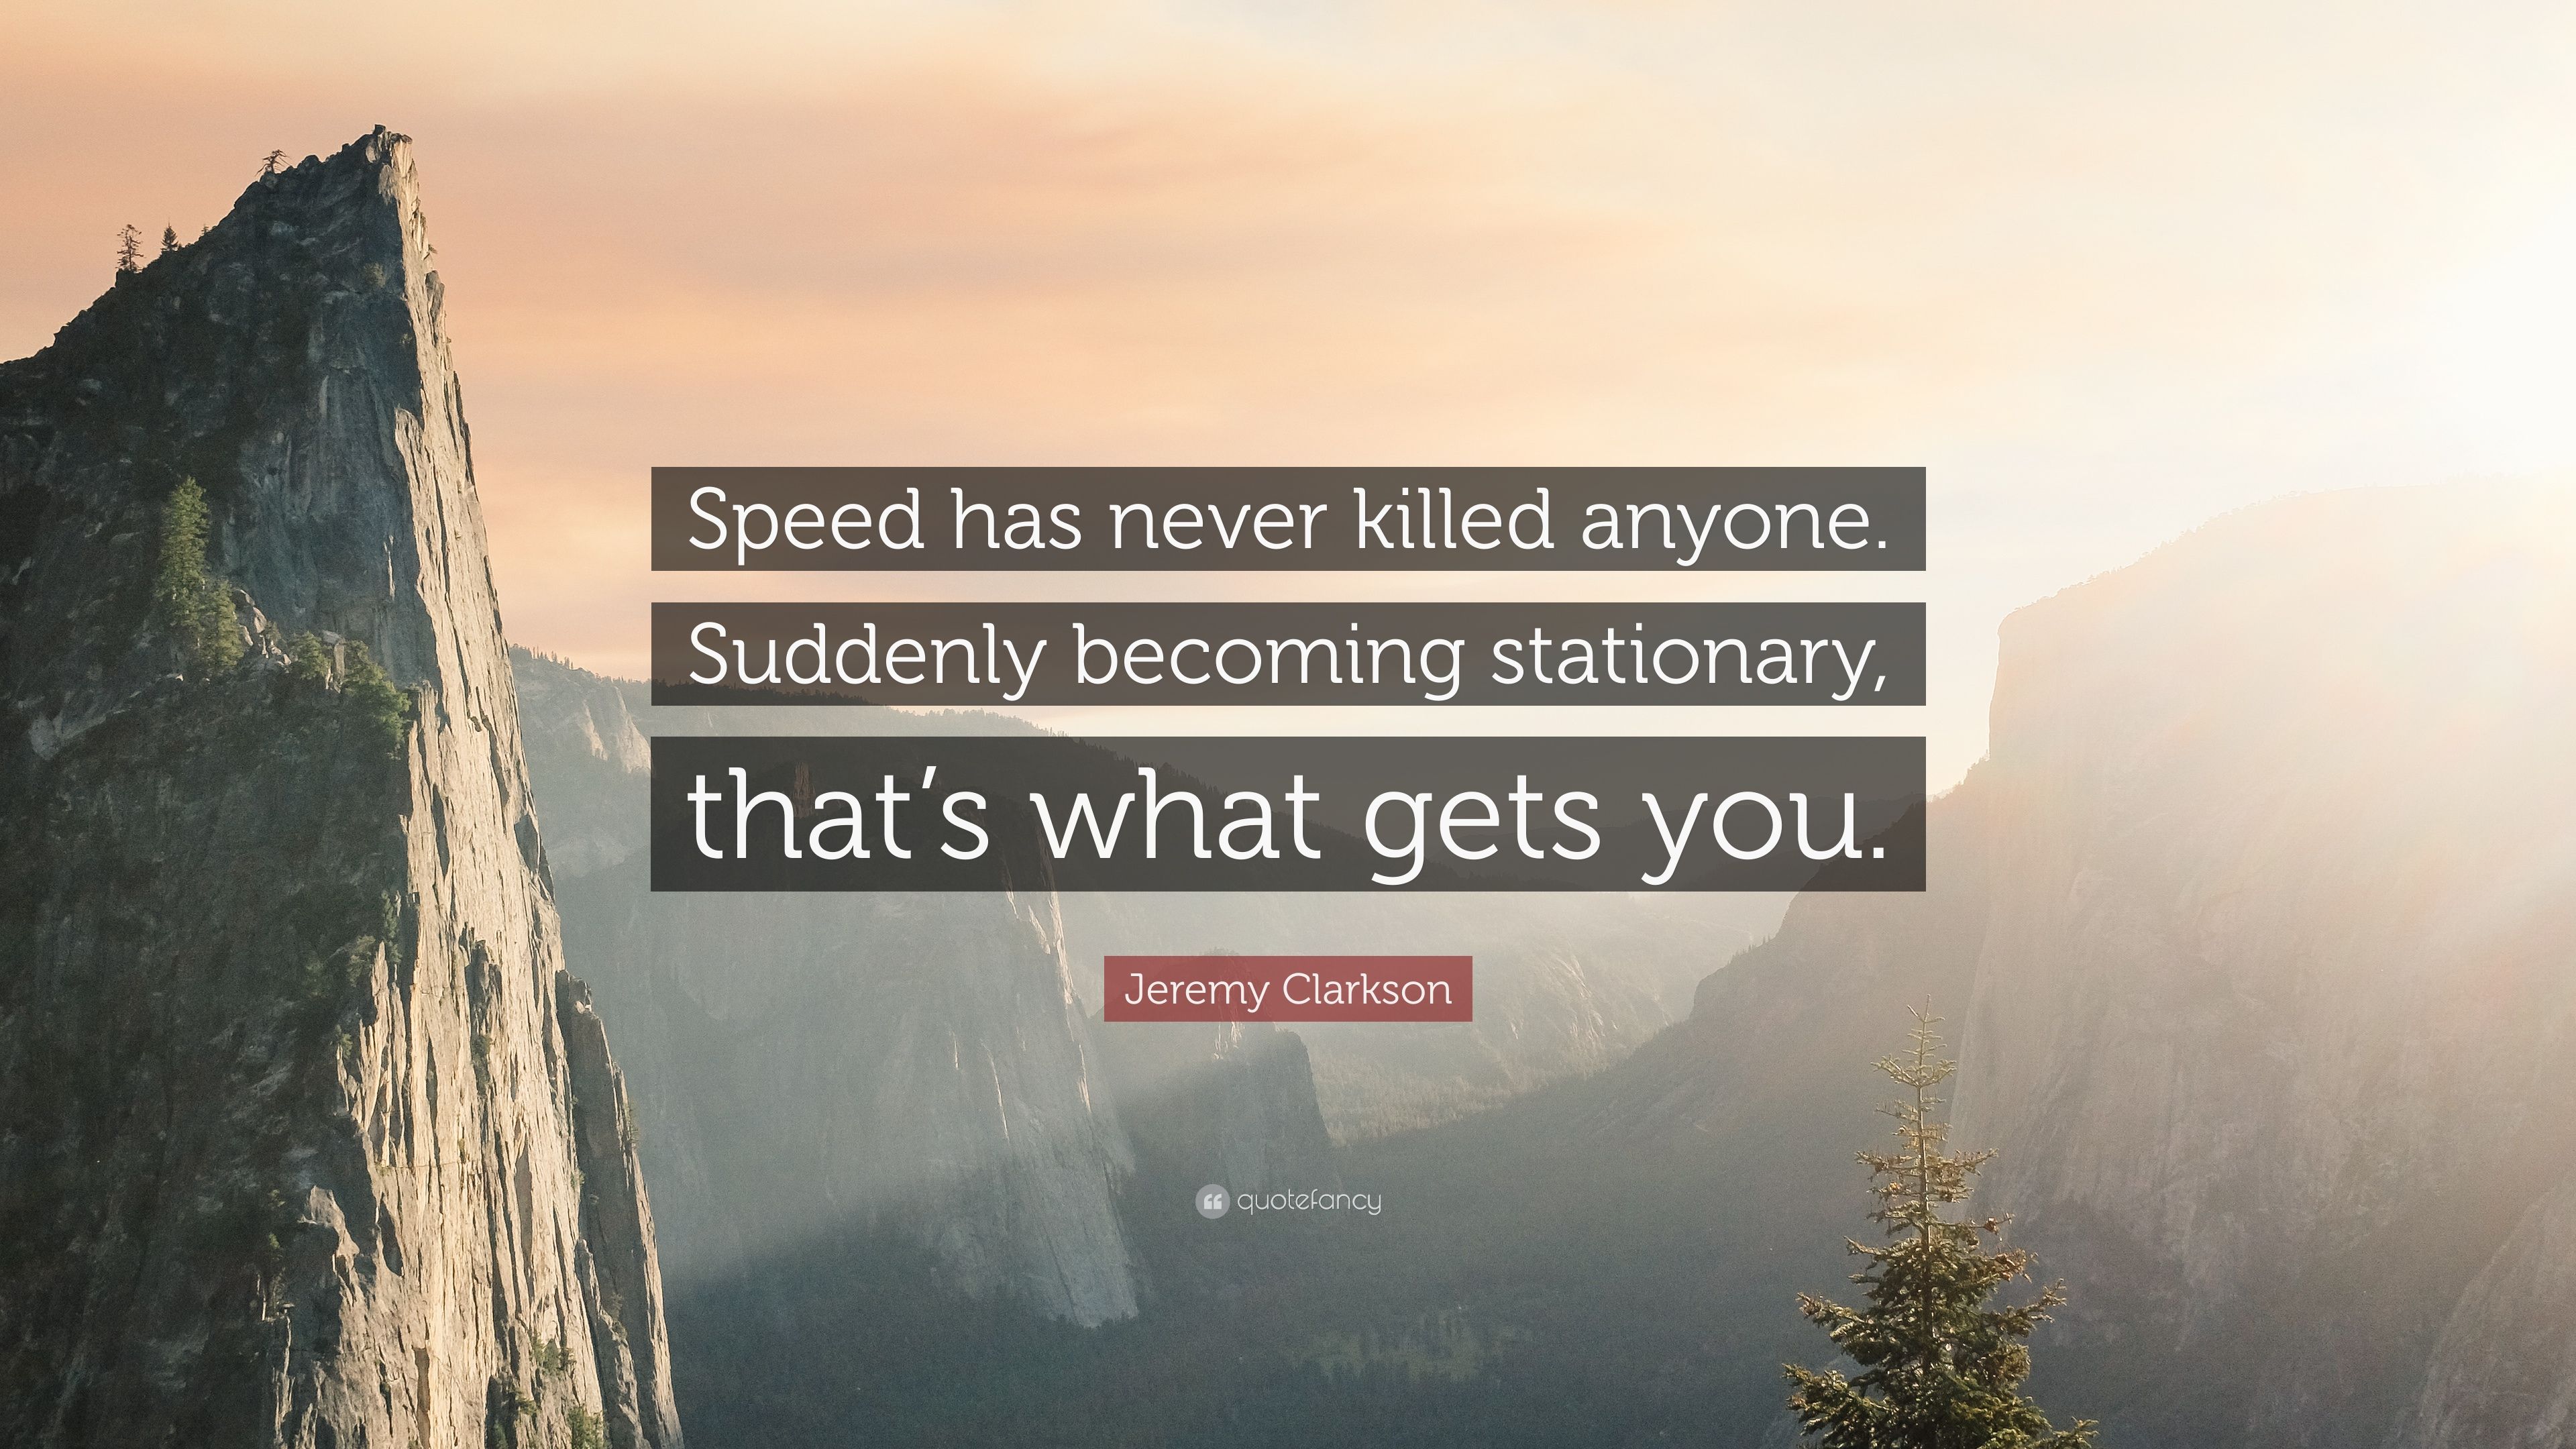 Jeremy Clarkson Quote: “Speed has never .quotefancy.com